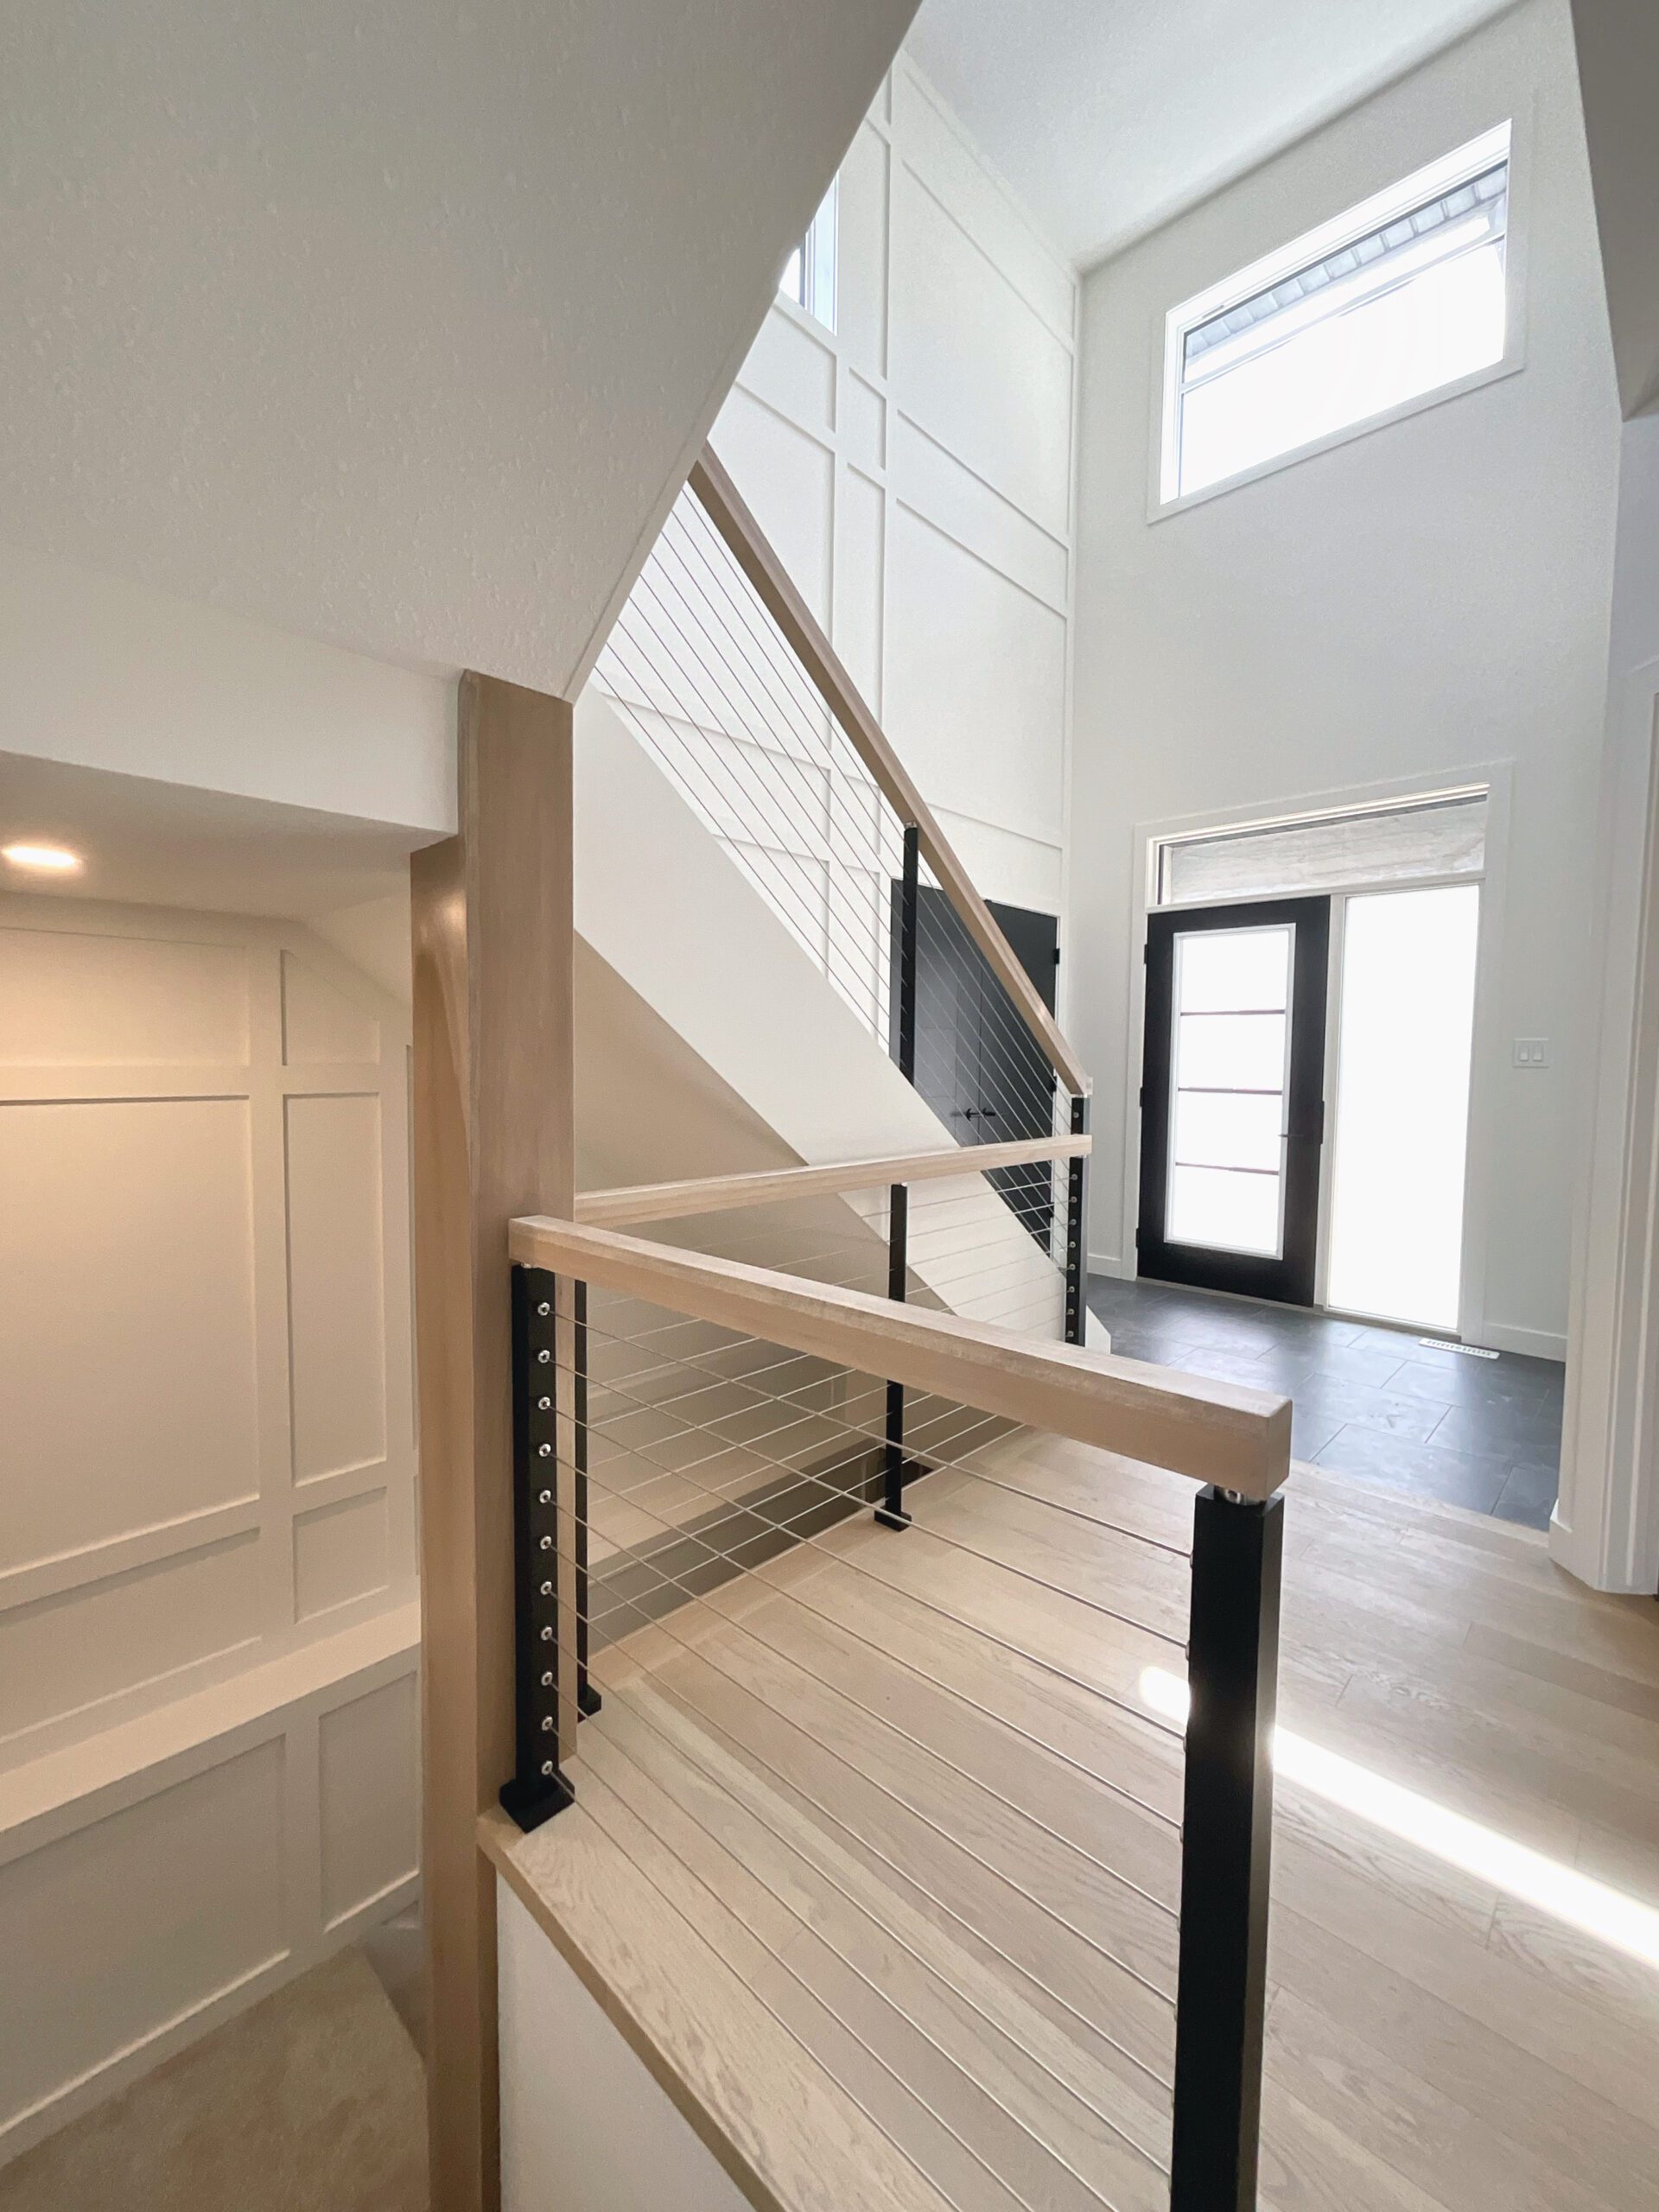 A staircase leading to second and basement level with decorative trim on the wall, cable railing and hardwood flooring, also shows front door entryway with tile flooring.